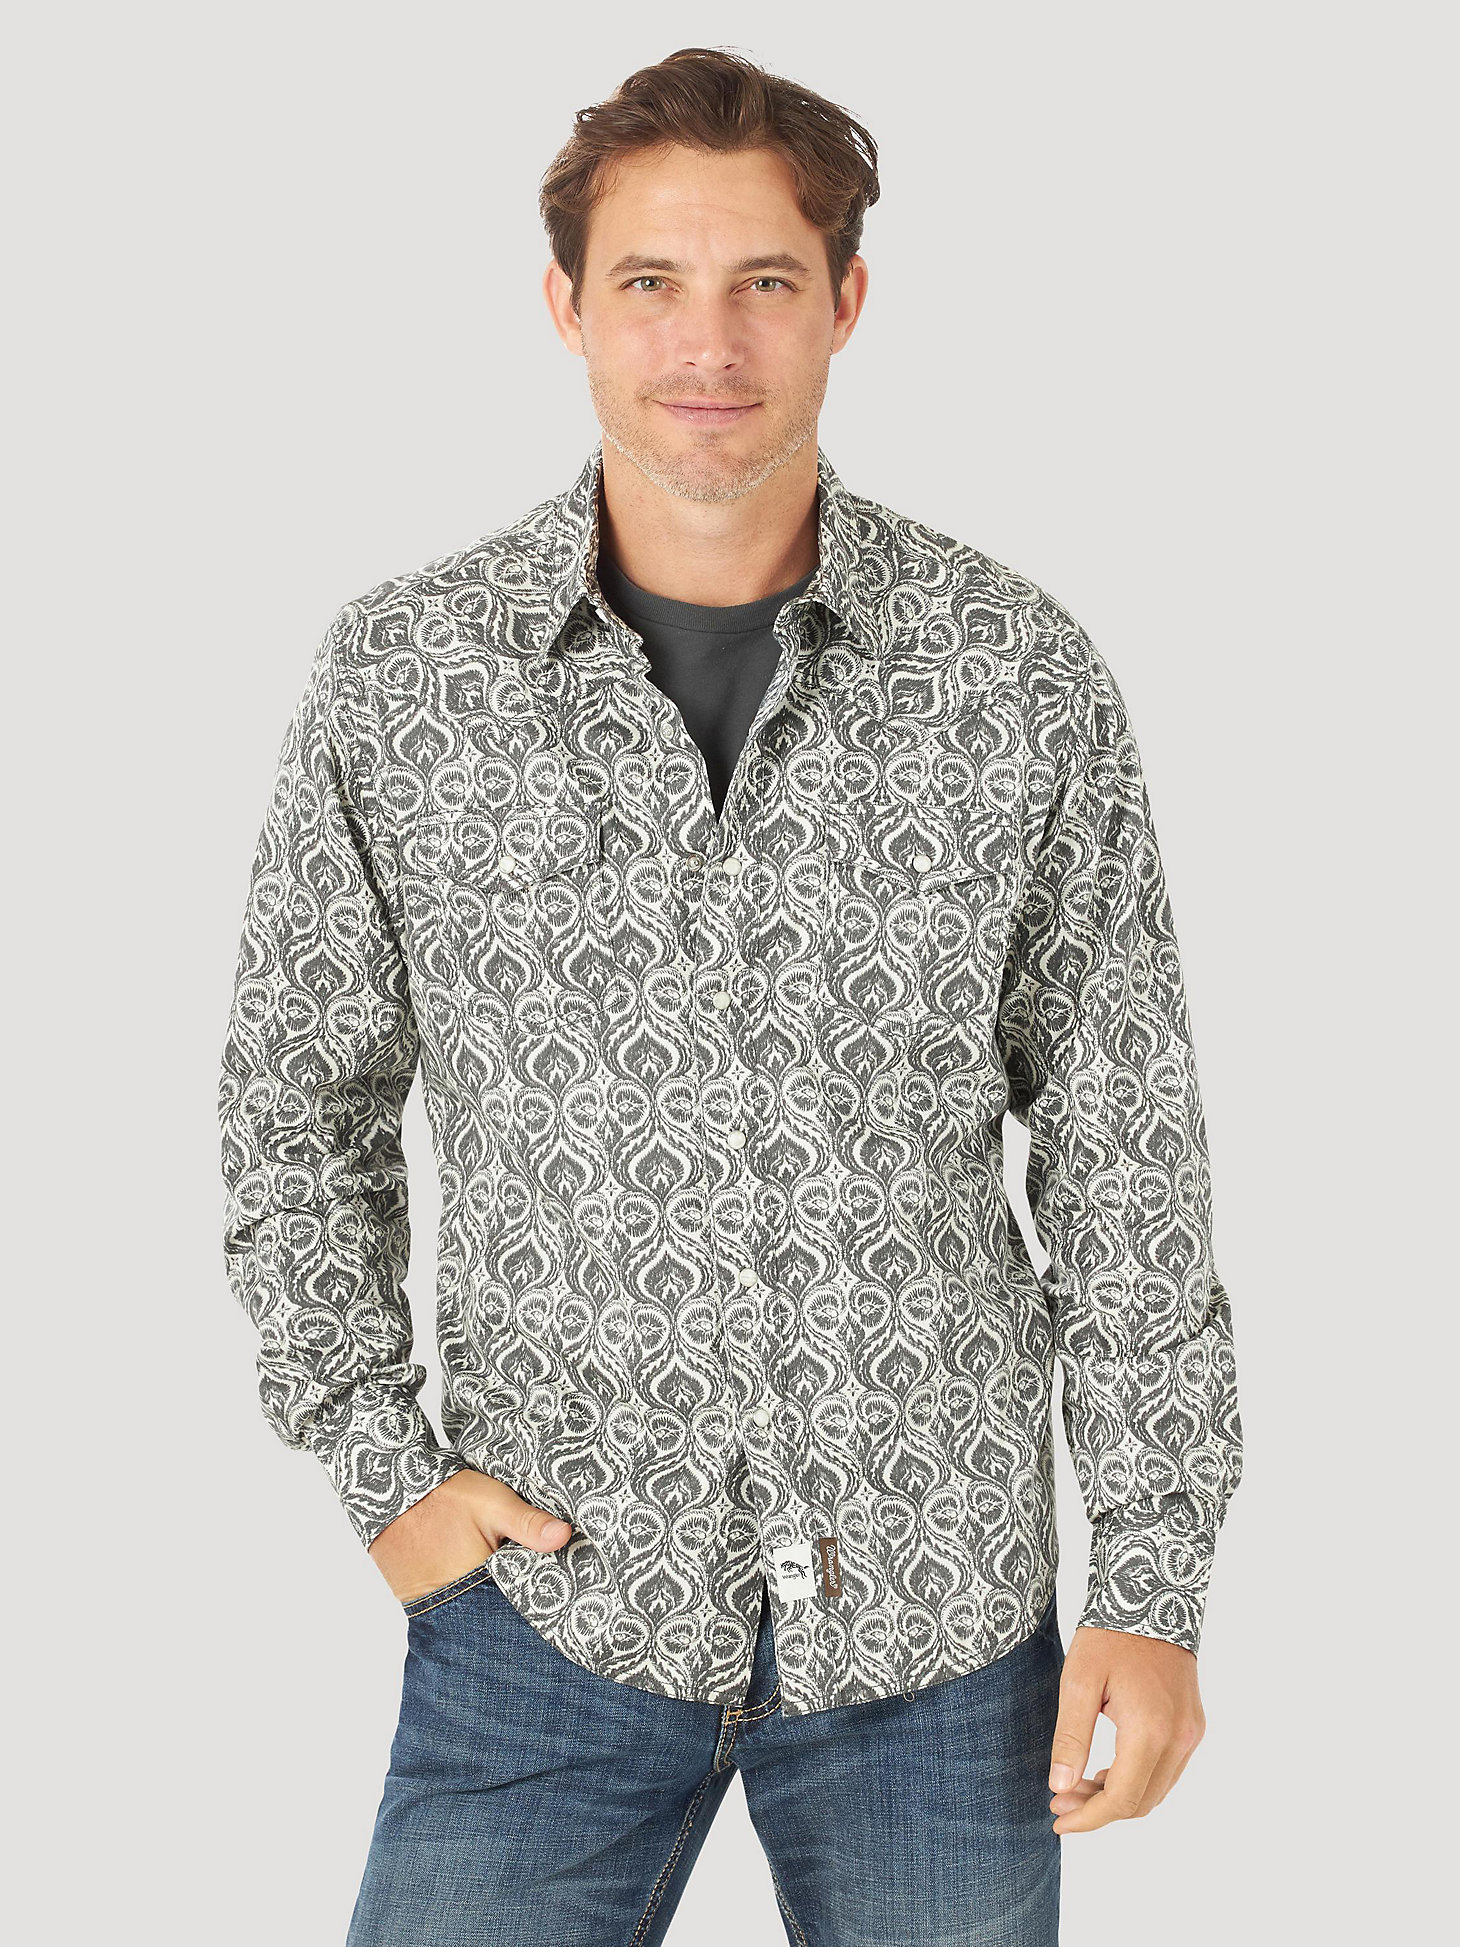 Men's Wrangler Retro® Long Sleeve Western Snap Printed Shirt in Grey Feathers main view